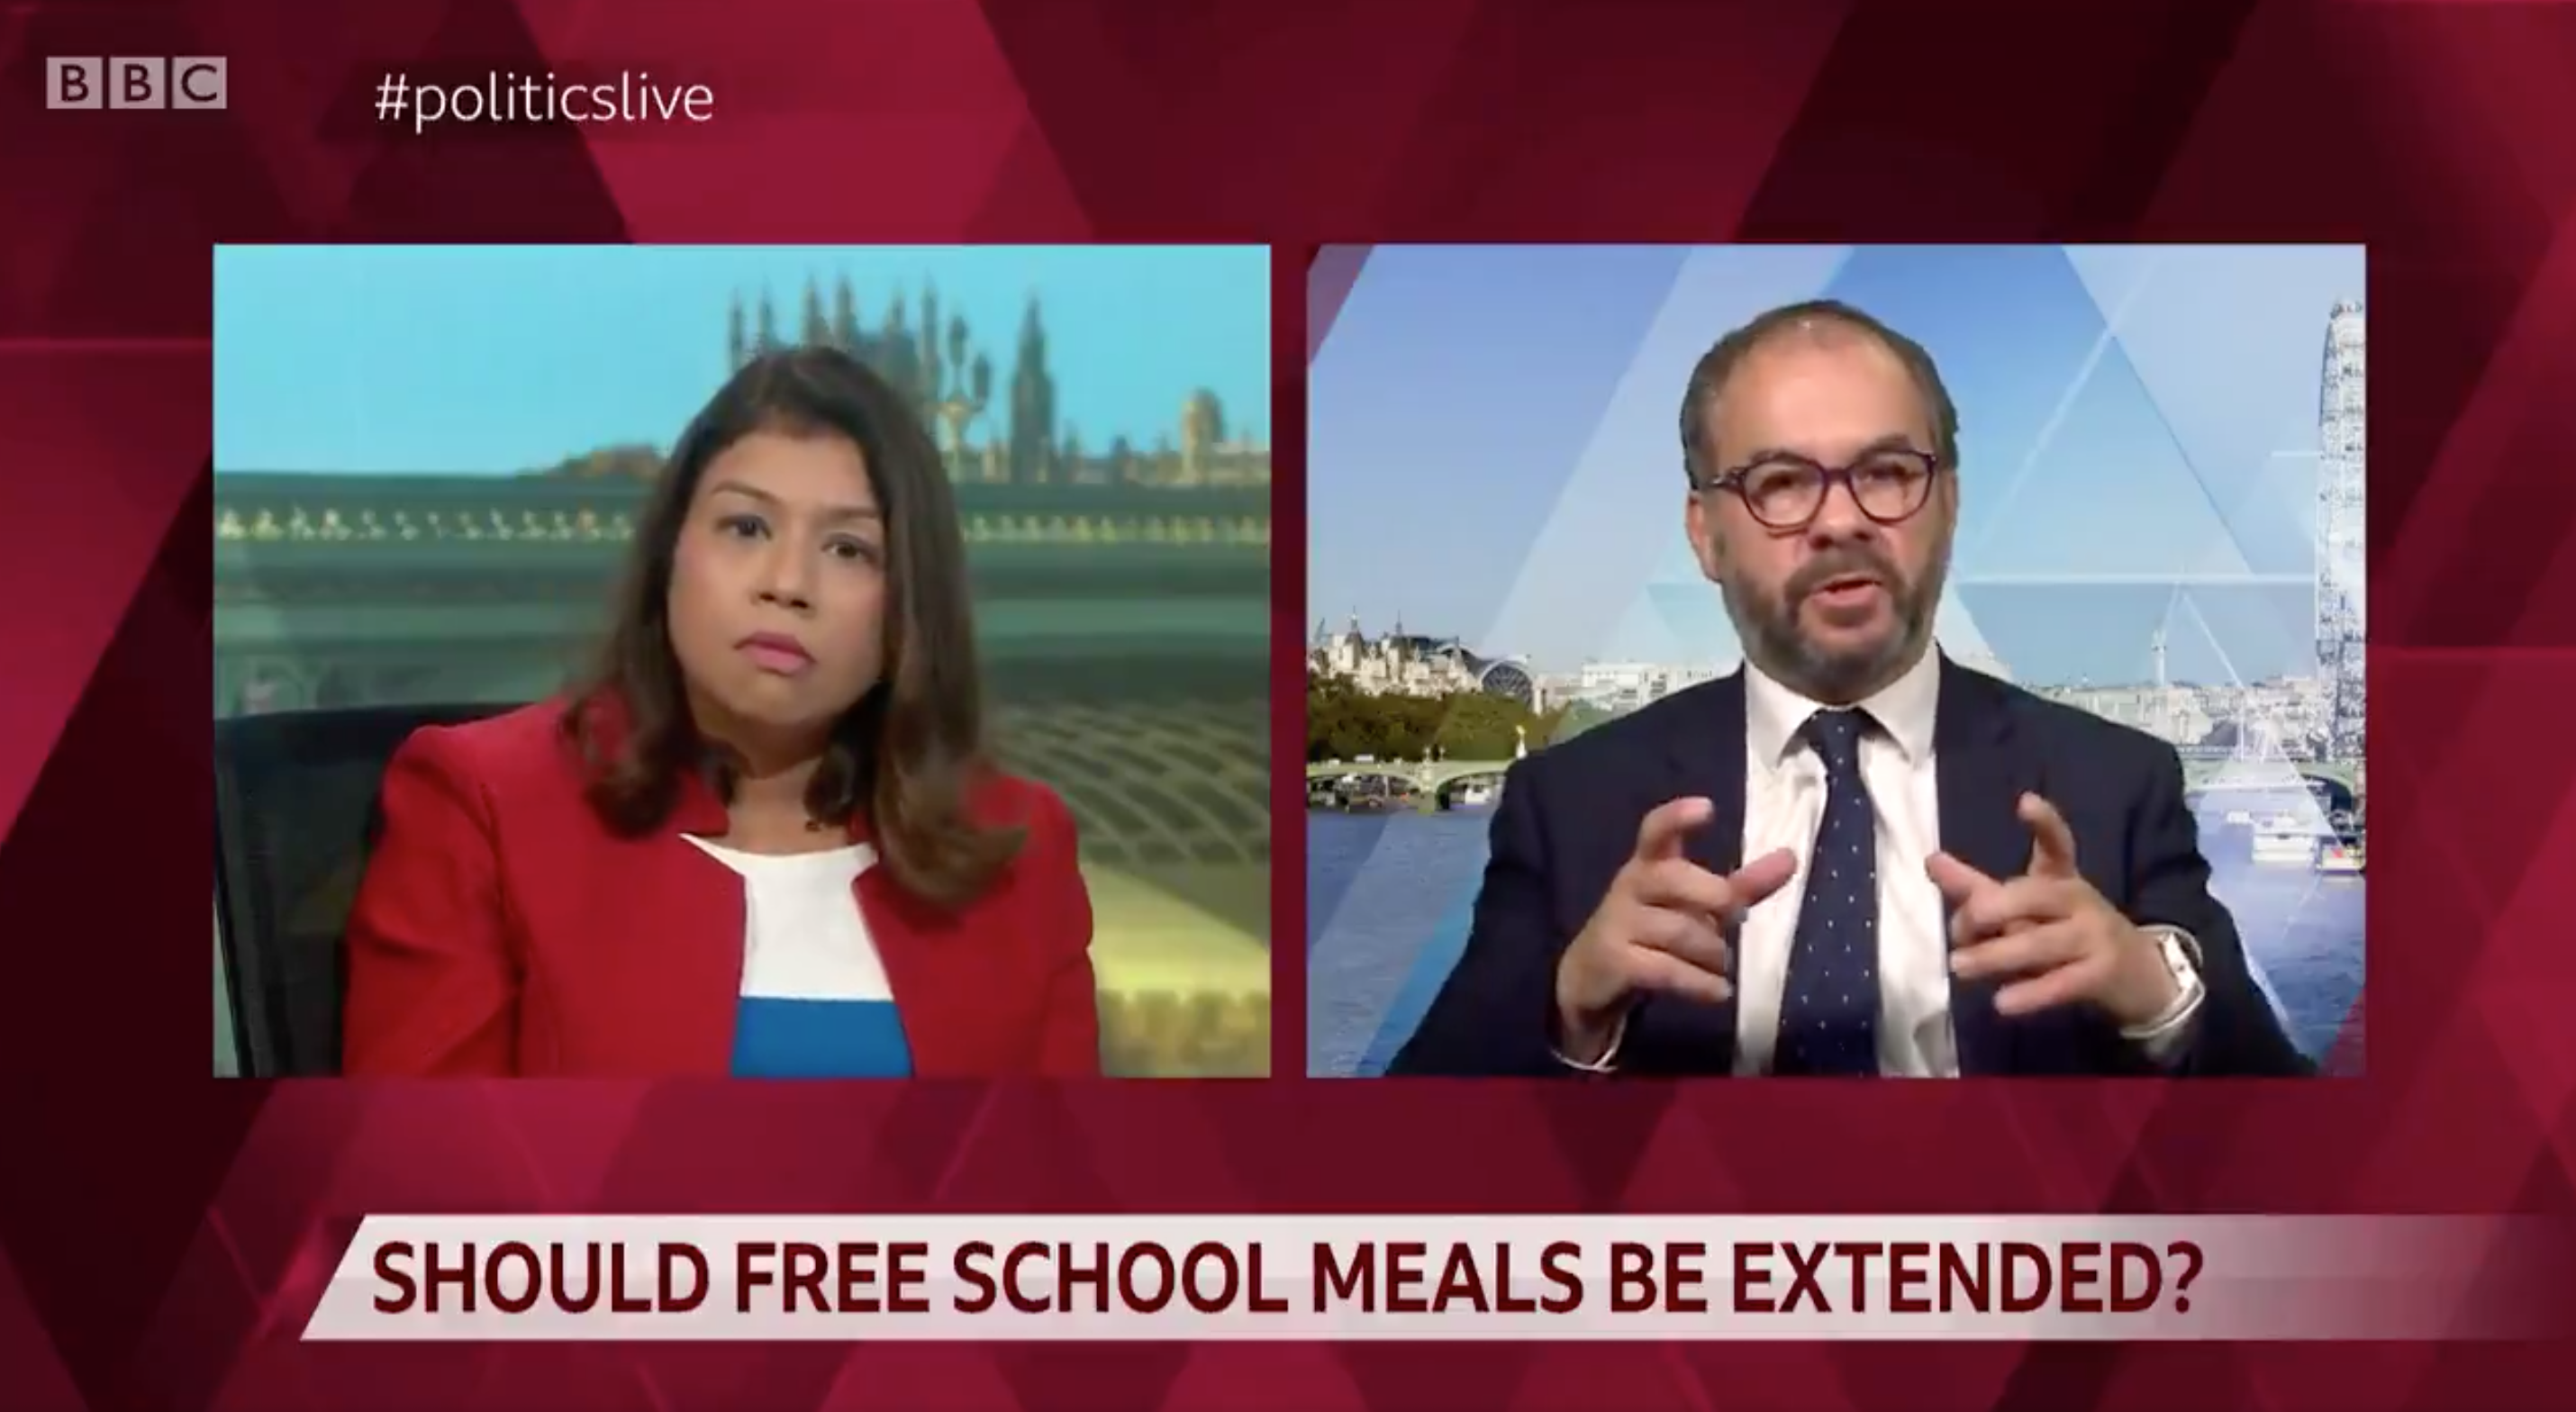 WATCH: “Children have been going hungry for years,” says minister